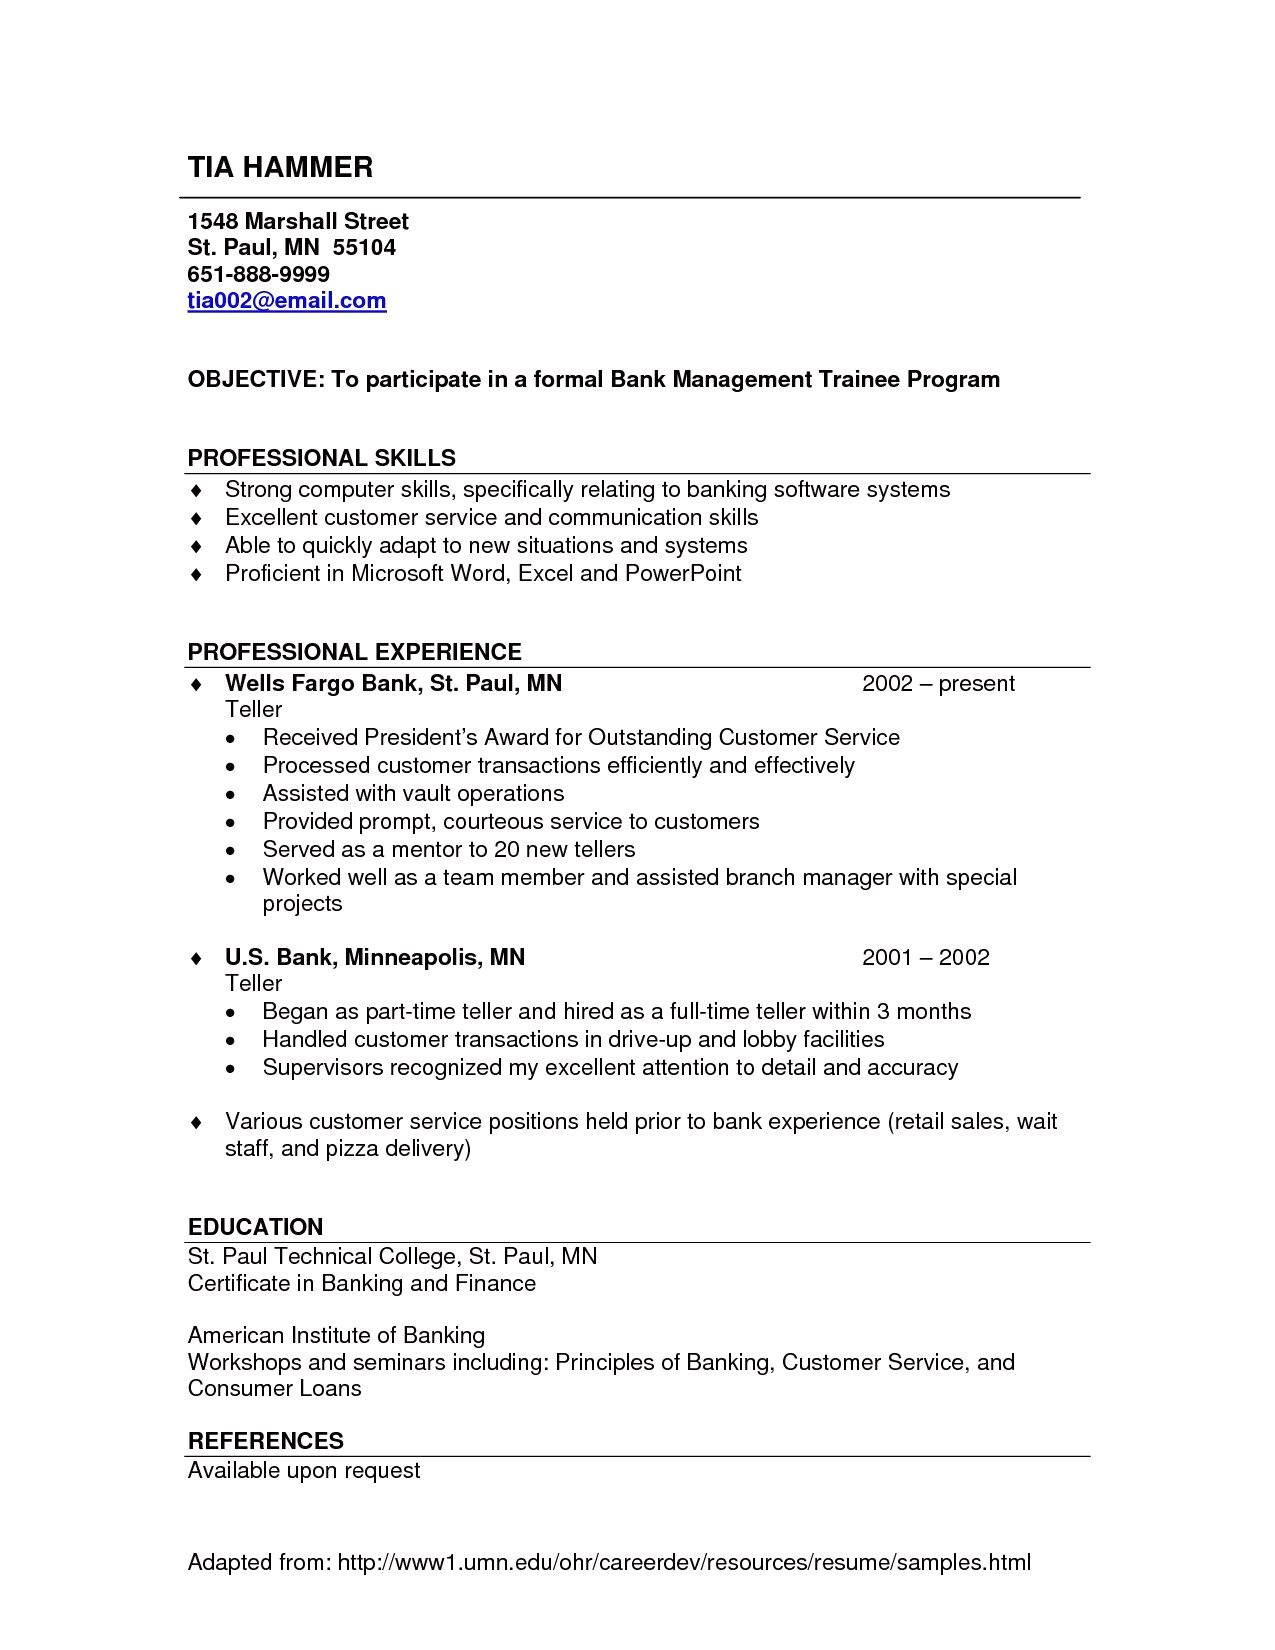 Professional Resume Examples Professional Resume Examples Ravishing Skills Resume Template Resumes Example Professional Resume Examples Collection professional resume examples|wikiresume.com